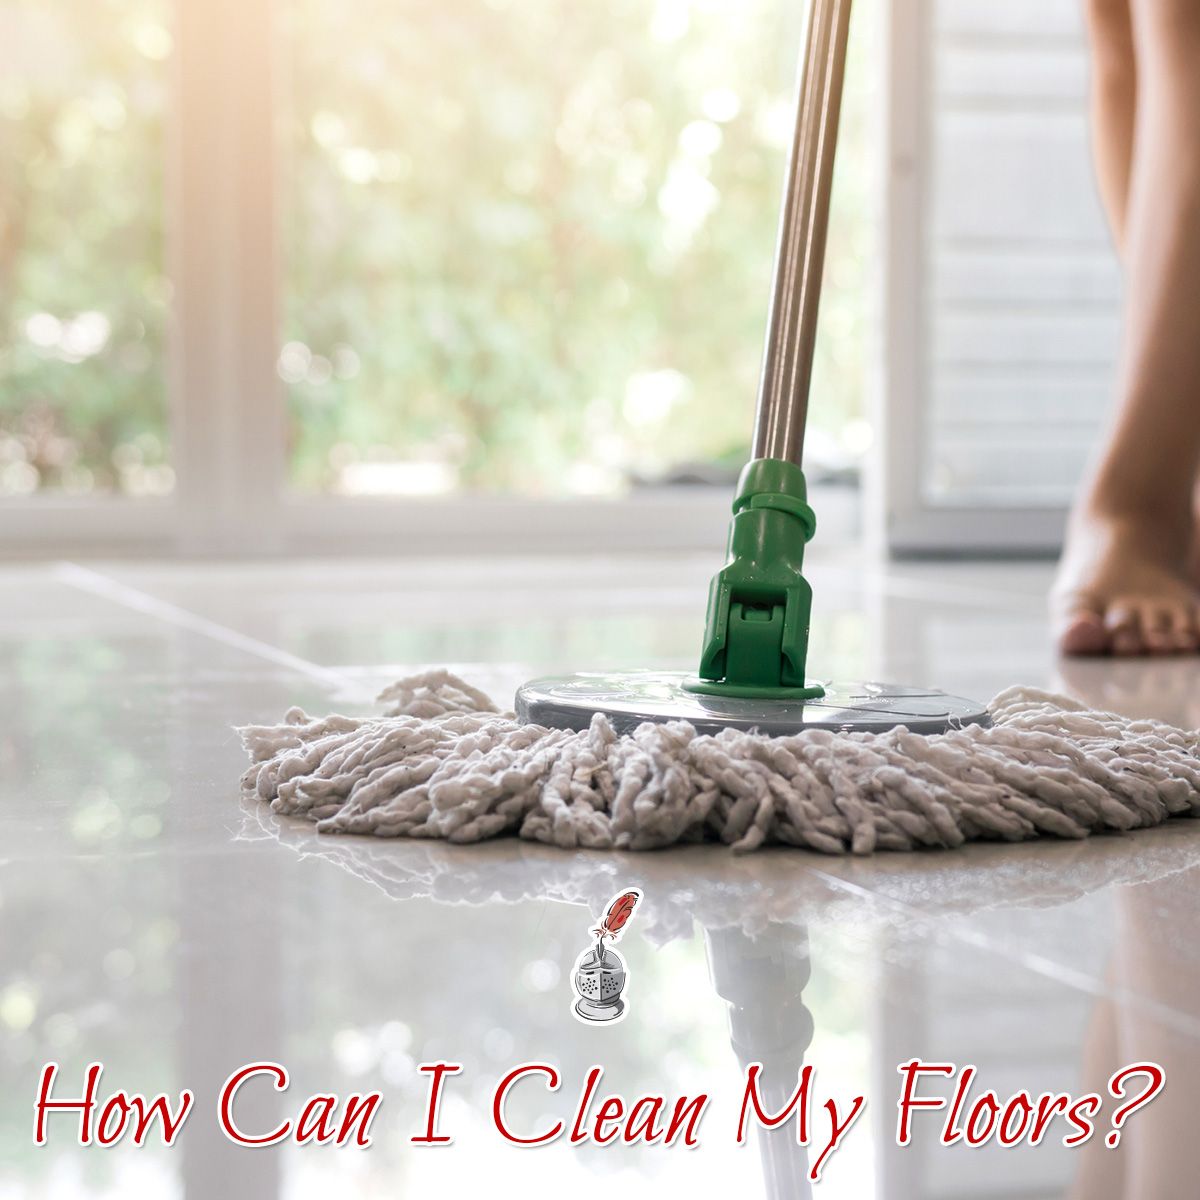 How Can I Clean My Floors?